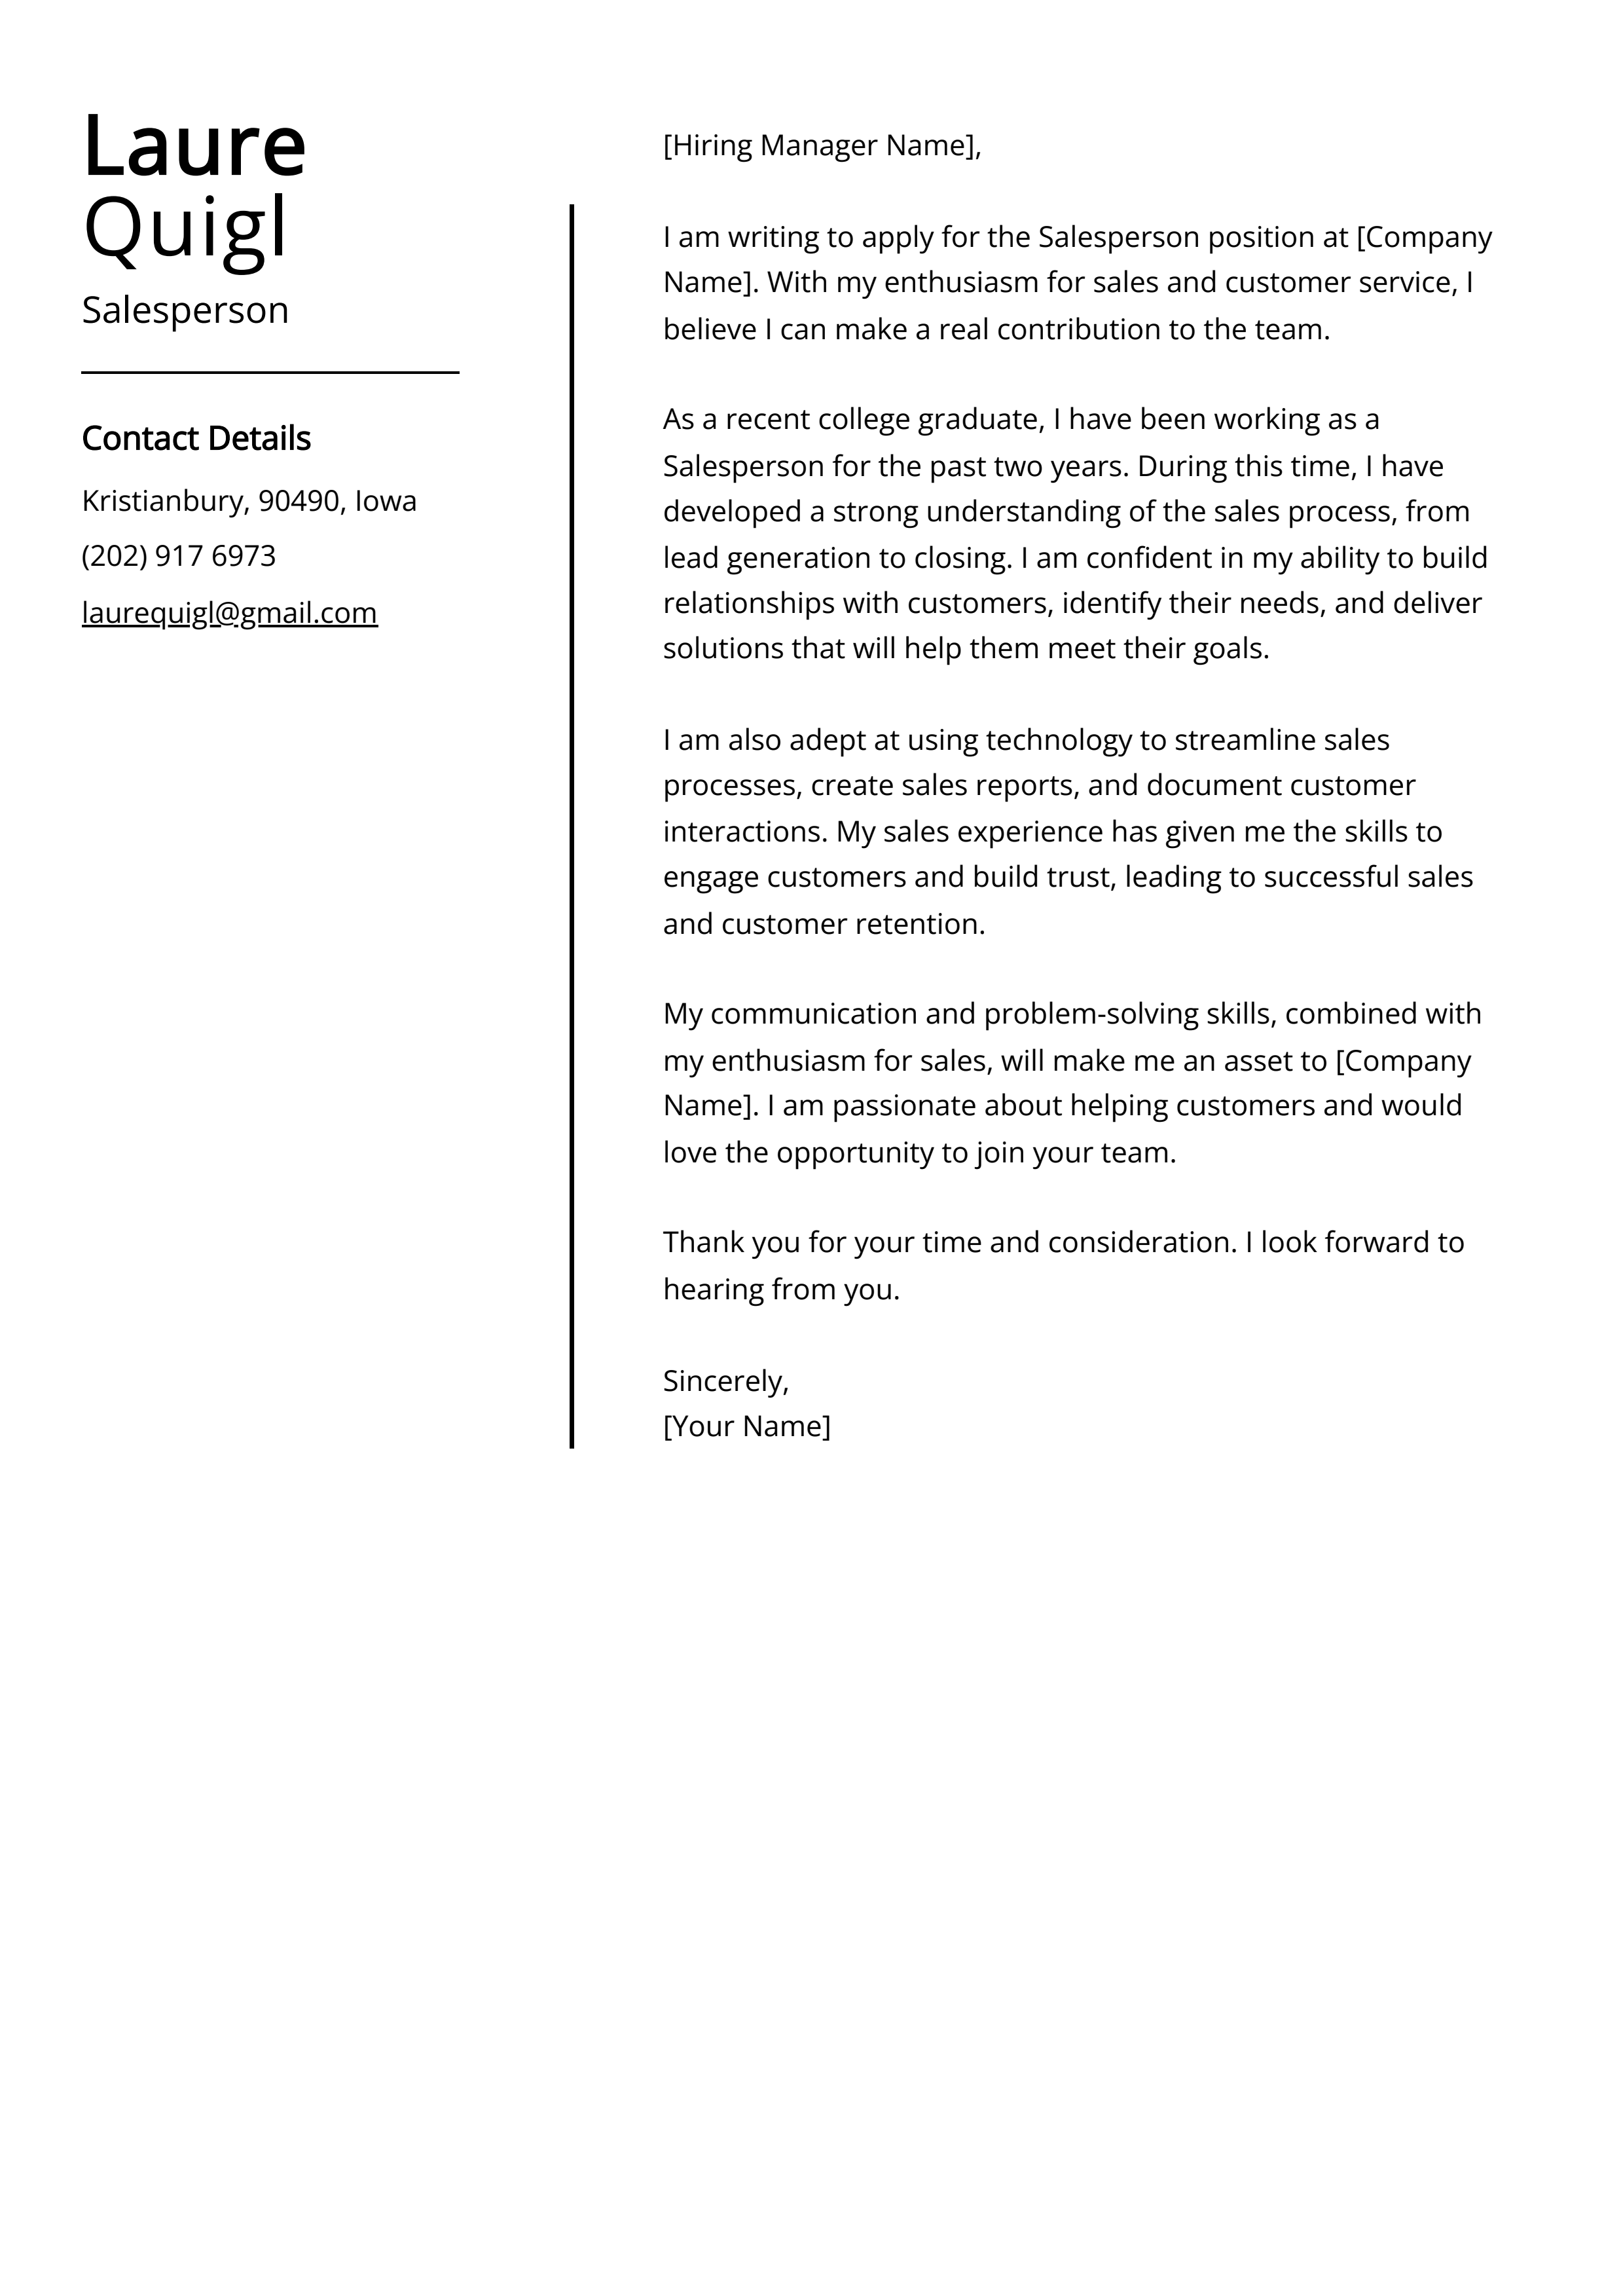 Salesperson Cover Letter Example